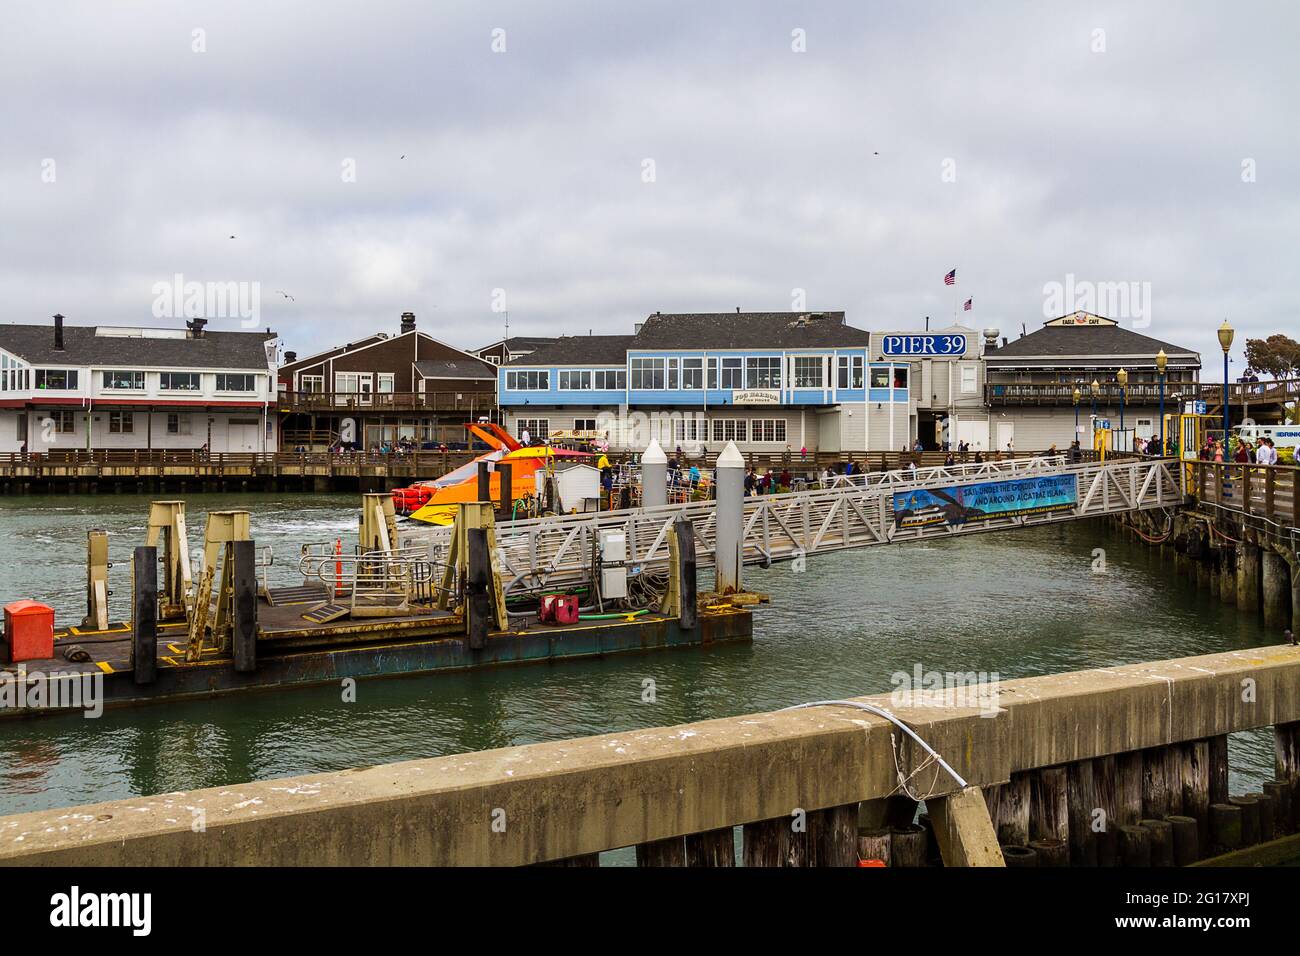 View of Pier 39 in San Francisco on a cloudy day with many tourists Stock Photo